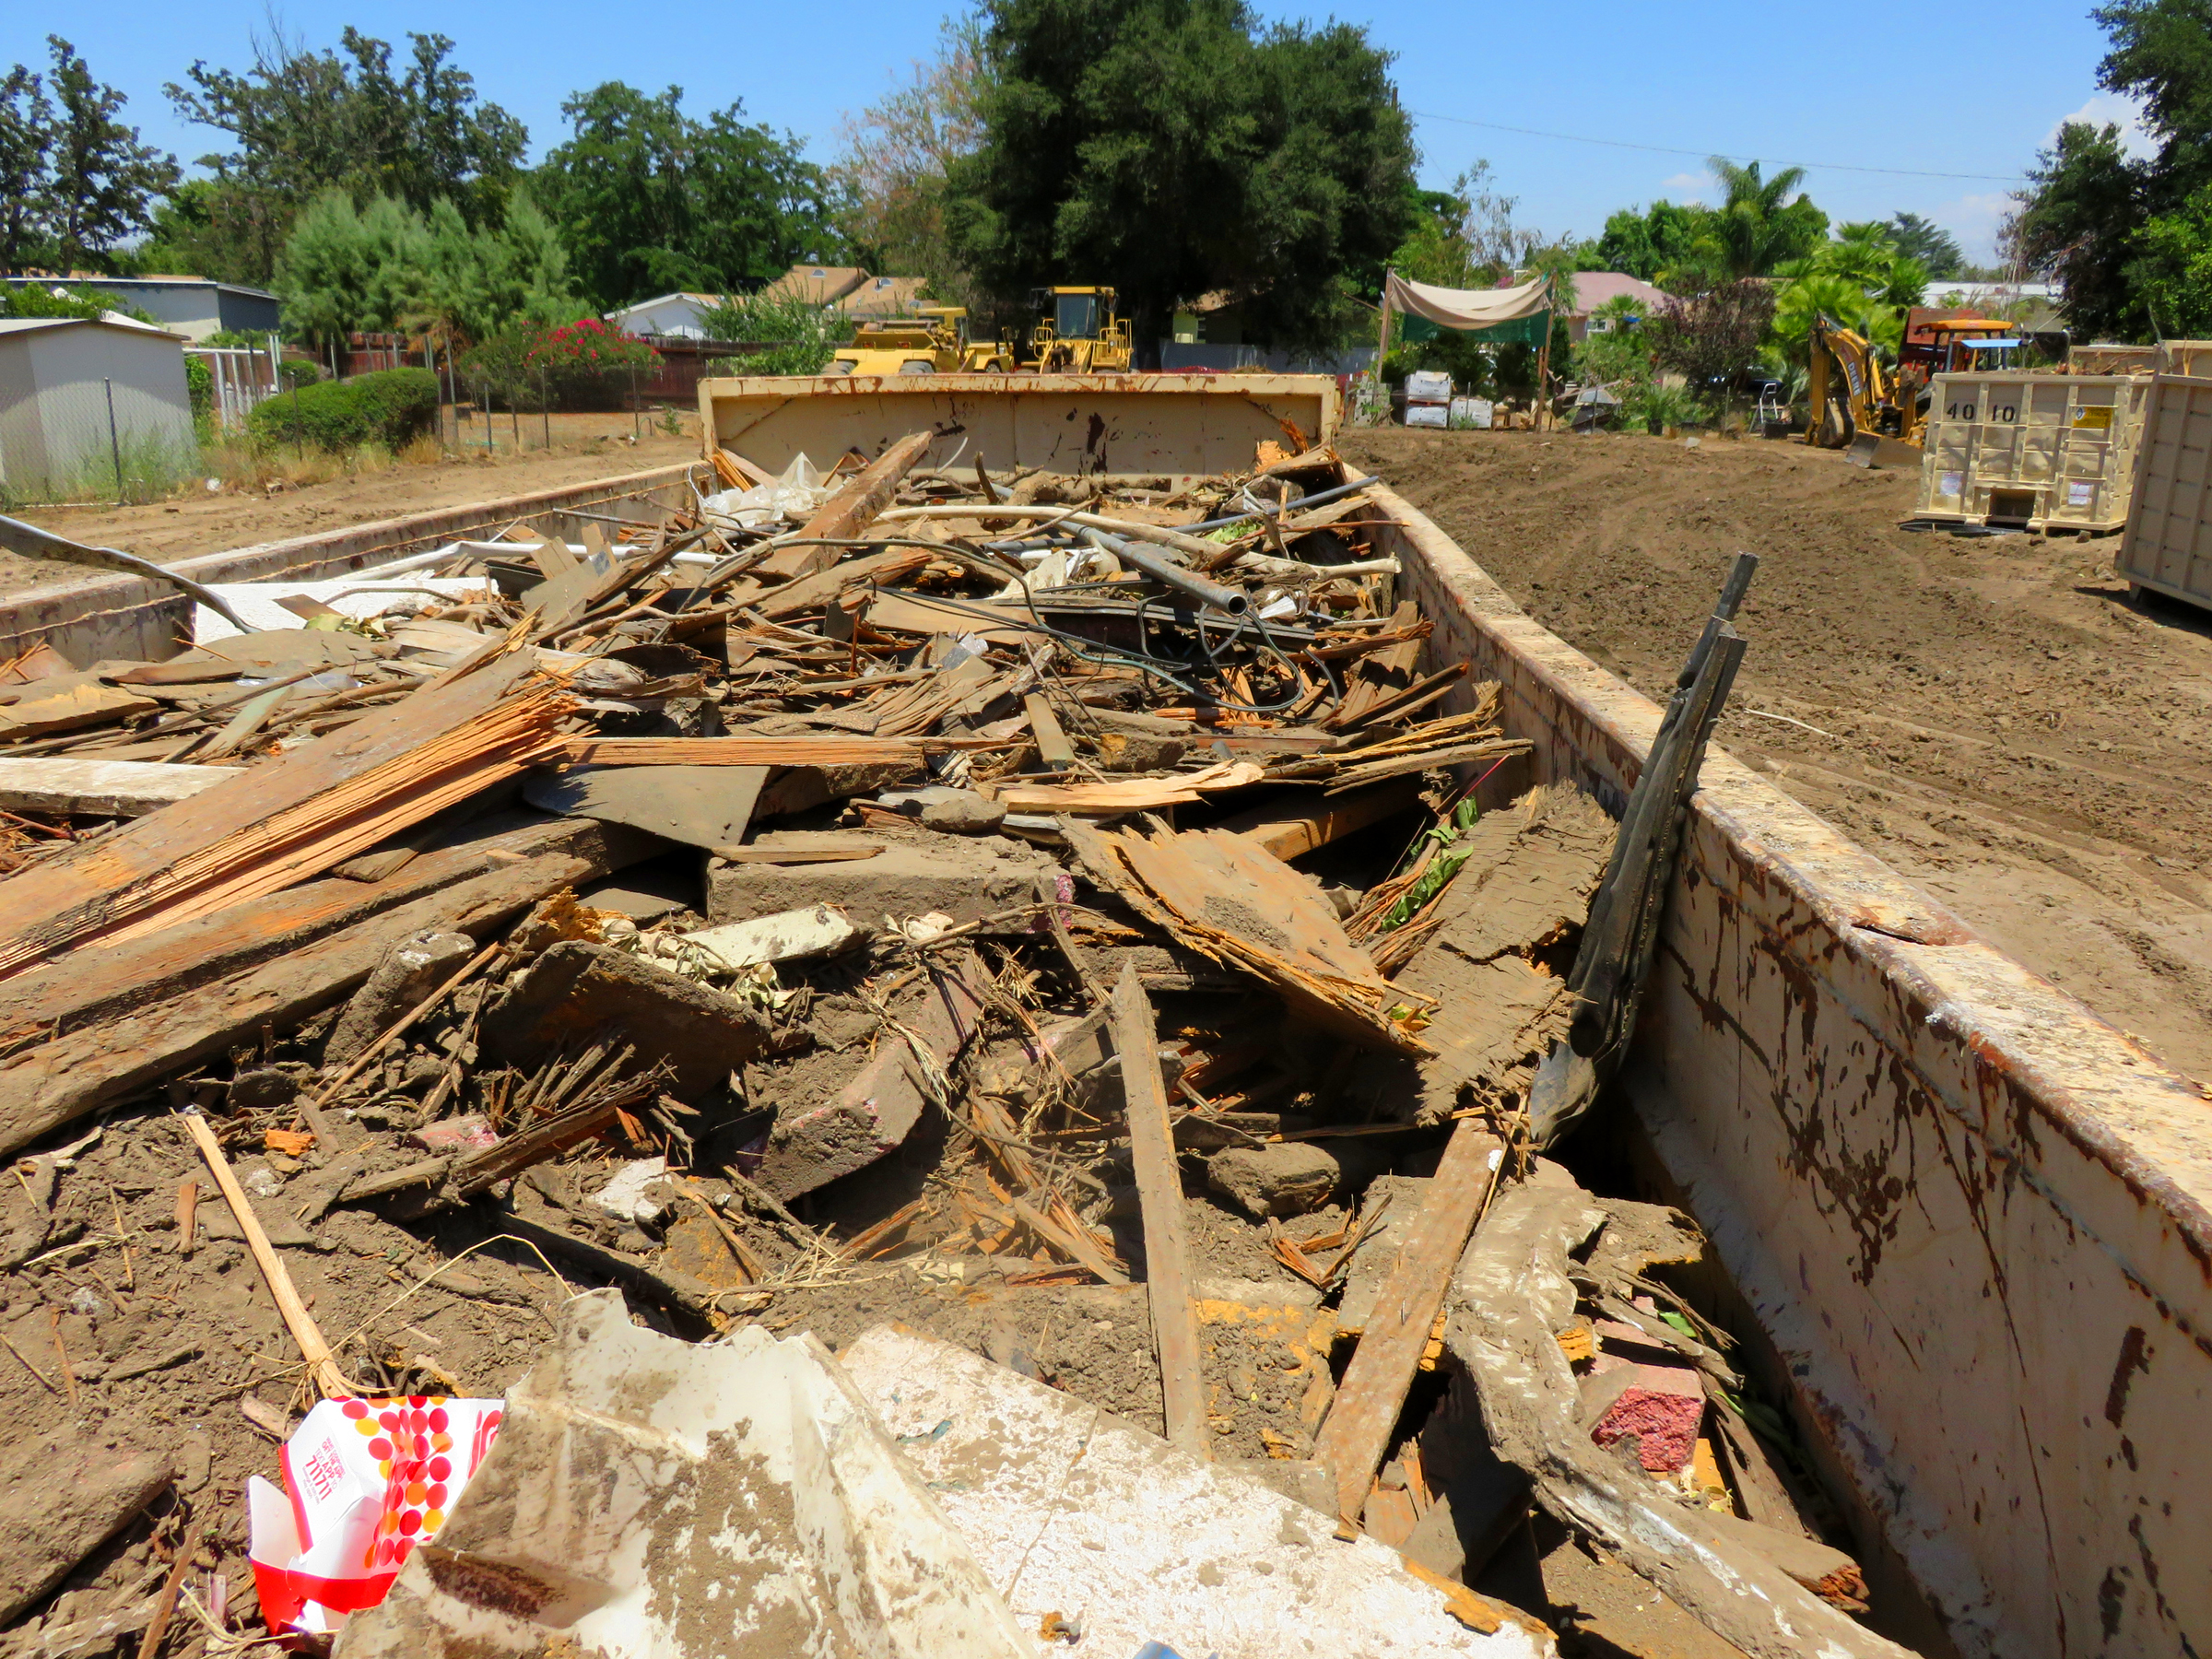 All that's left of the 3rd Newhall School building (ca. 1913-1928) is in some roll-off bins.